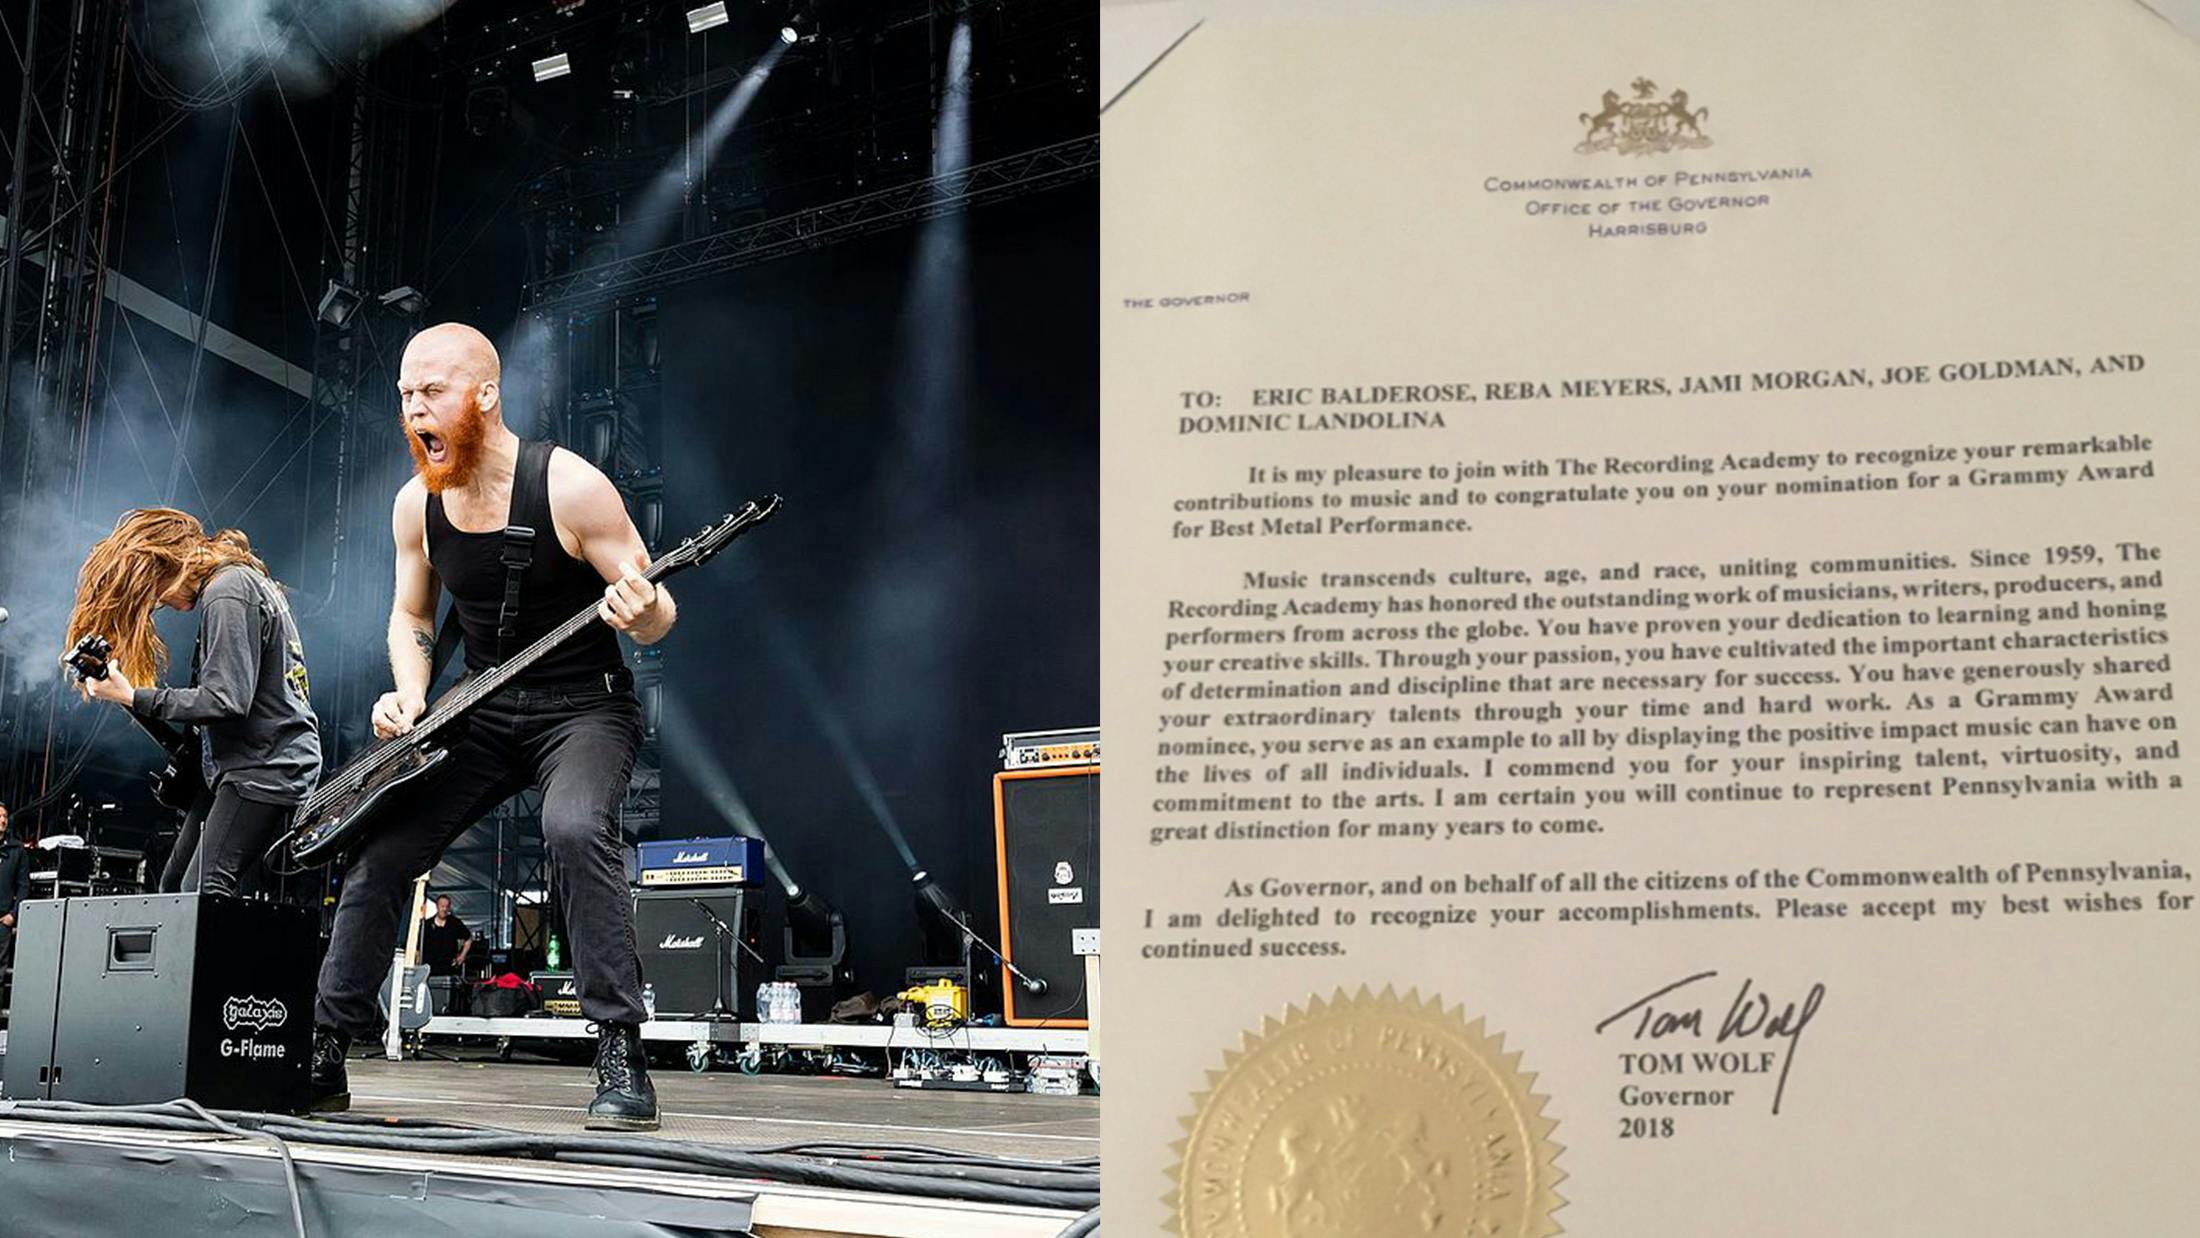 Code Orange Received A Letter Of Recognition From The Pennsylvania Governor